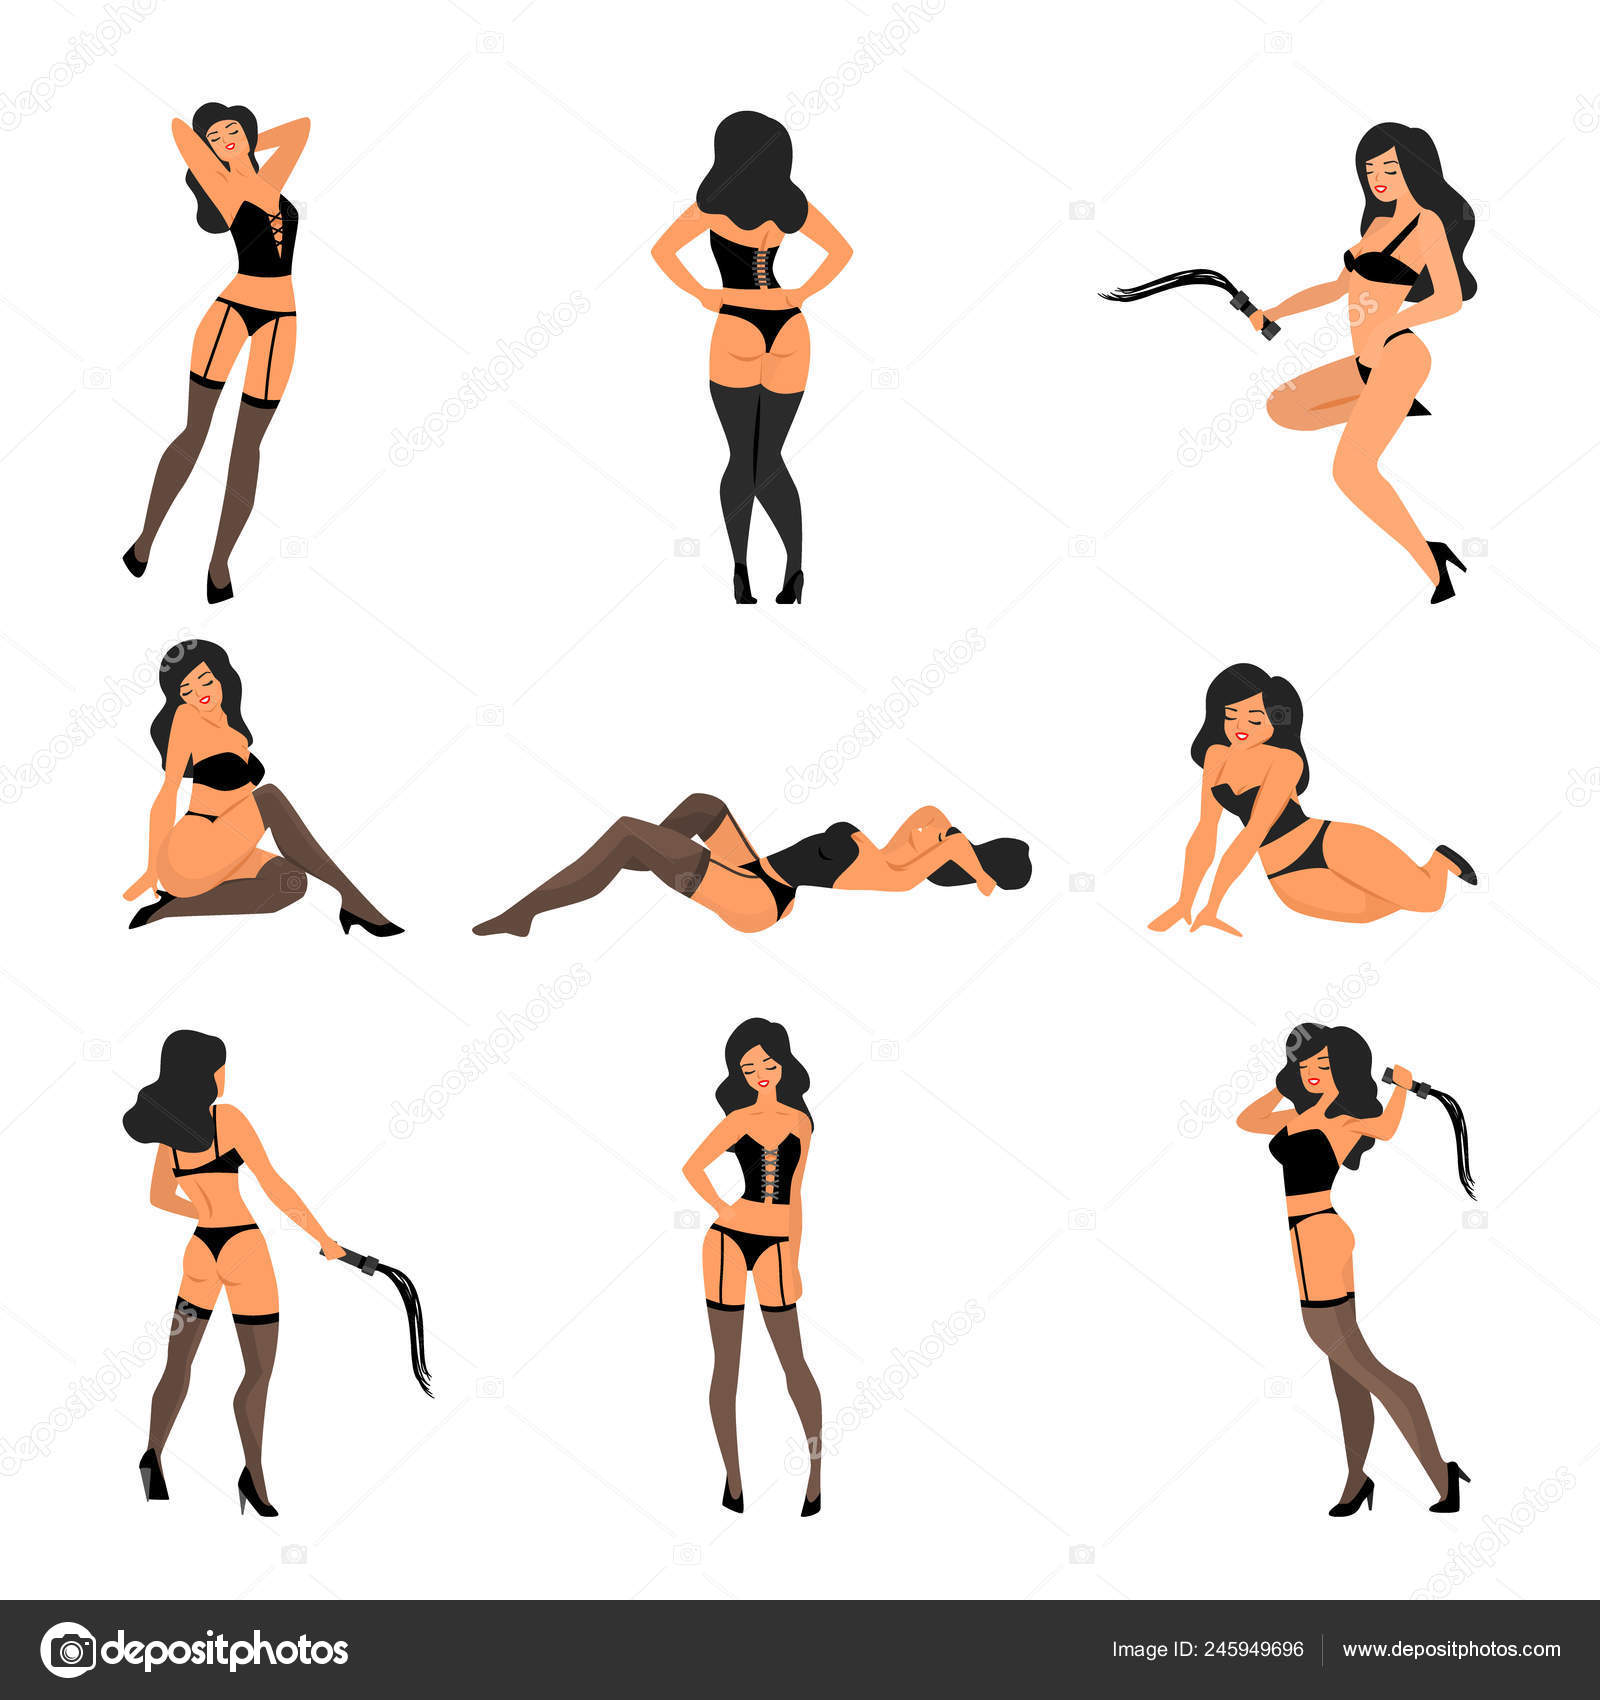 Sexy poses for women